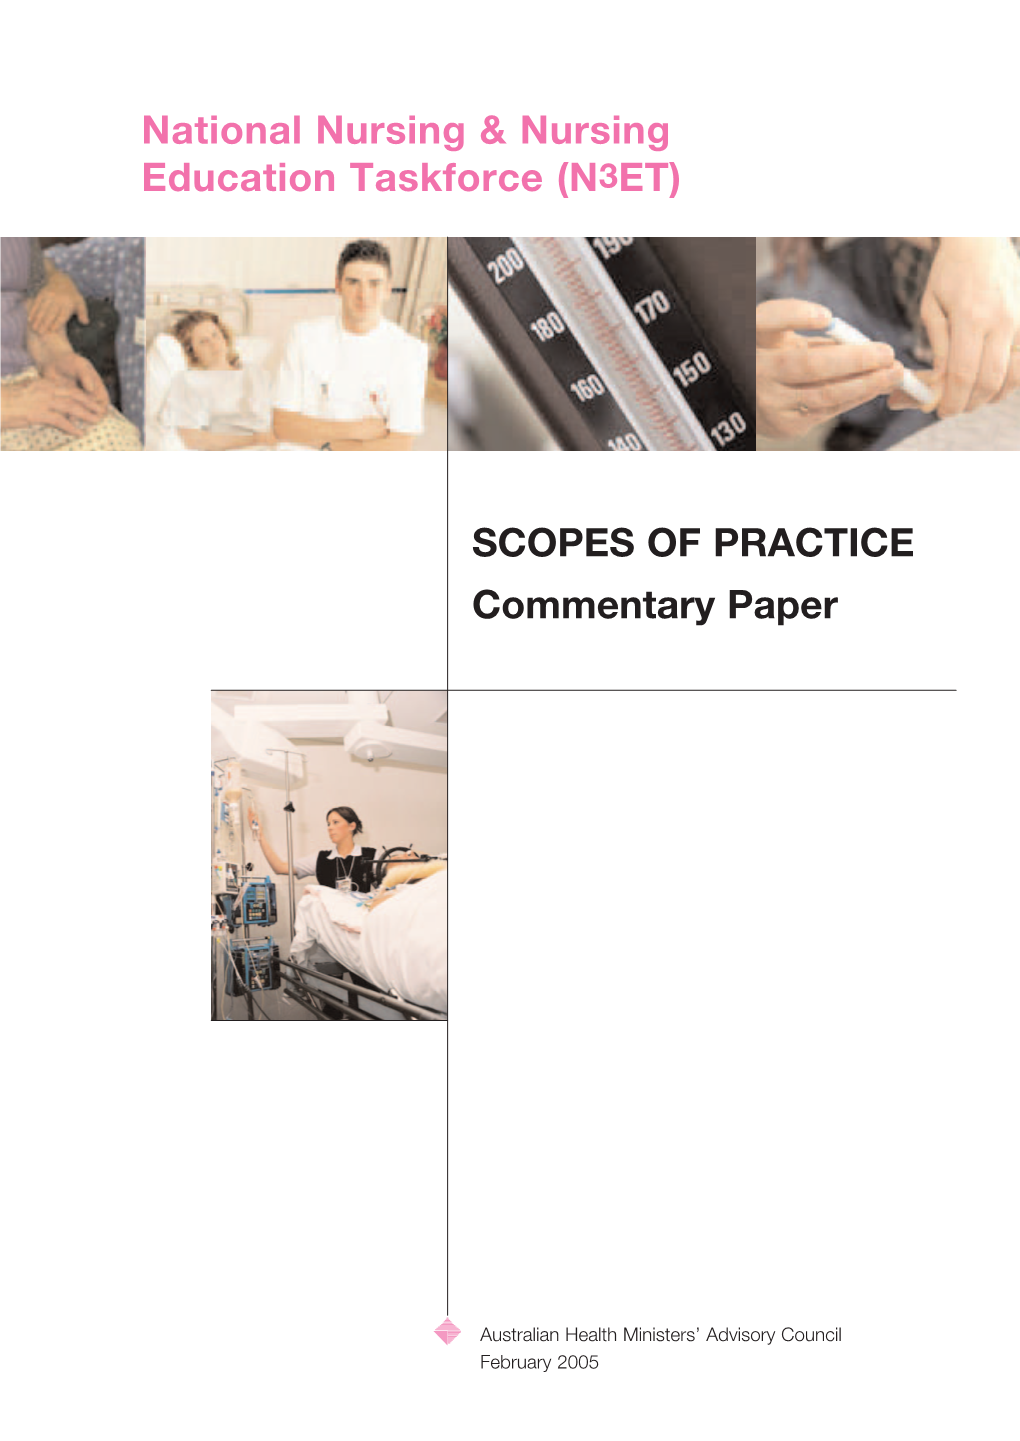 SCOPES of PRACTICE Commentary Paper